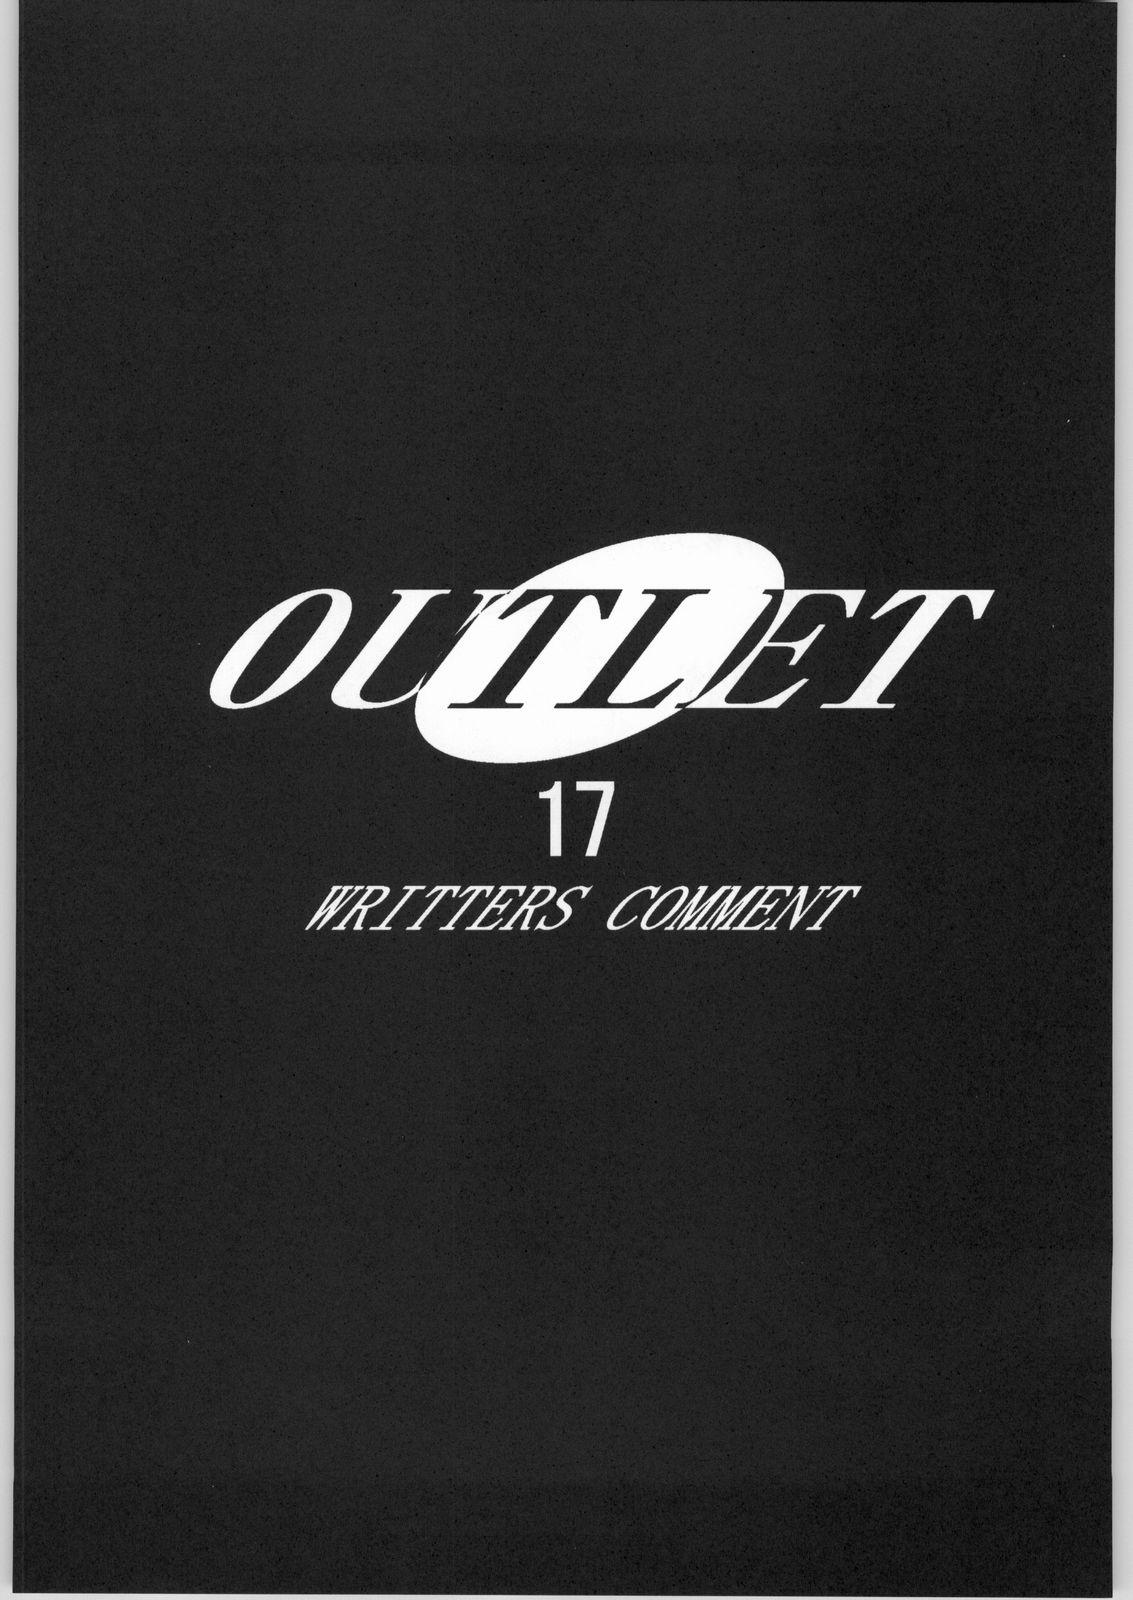 Outlet 17 39